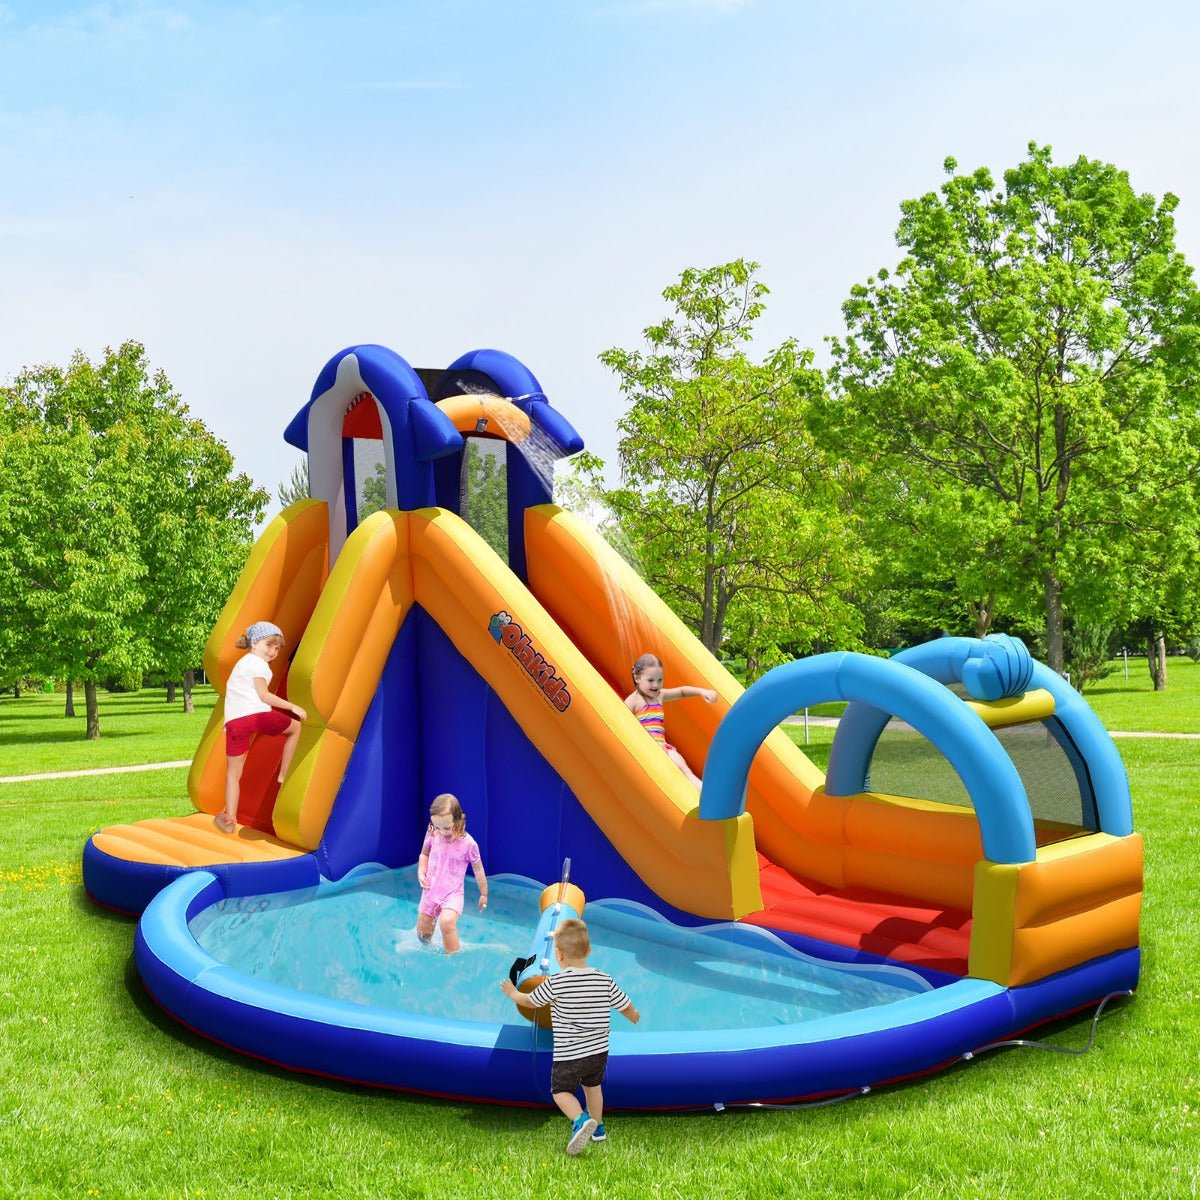 Children's Water Bounce House - Active Outdoor Play with Basketball Rim